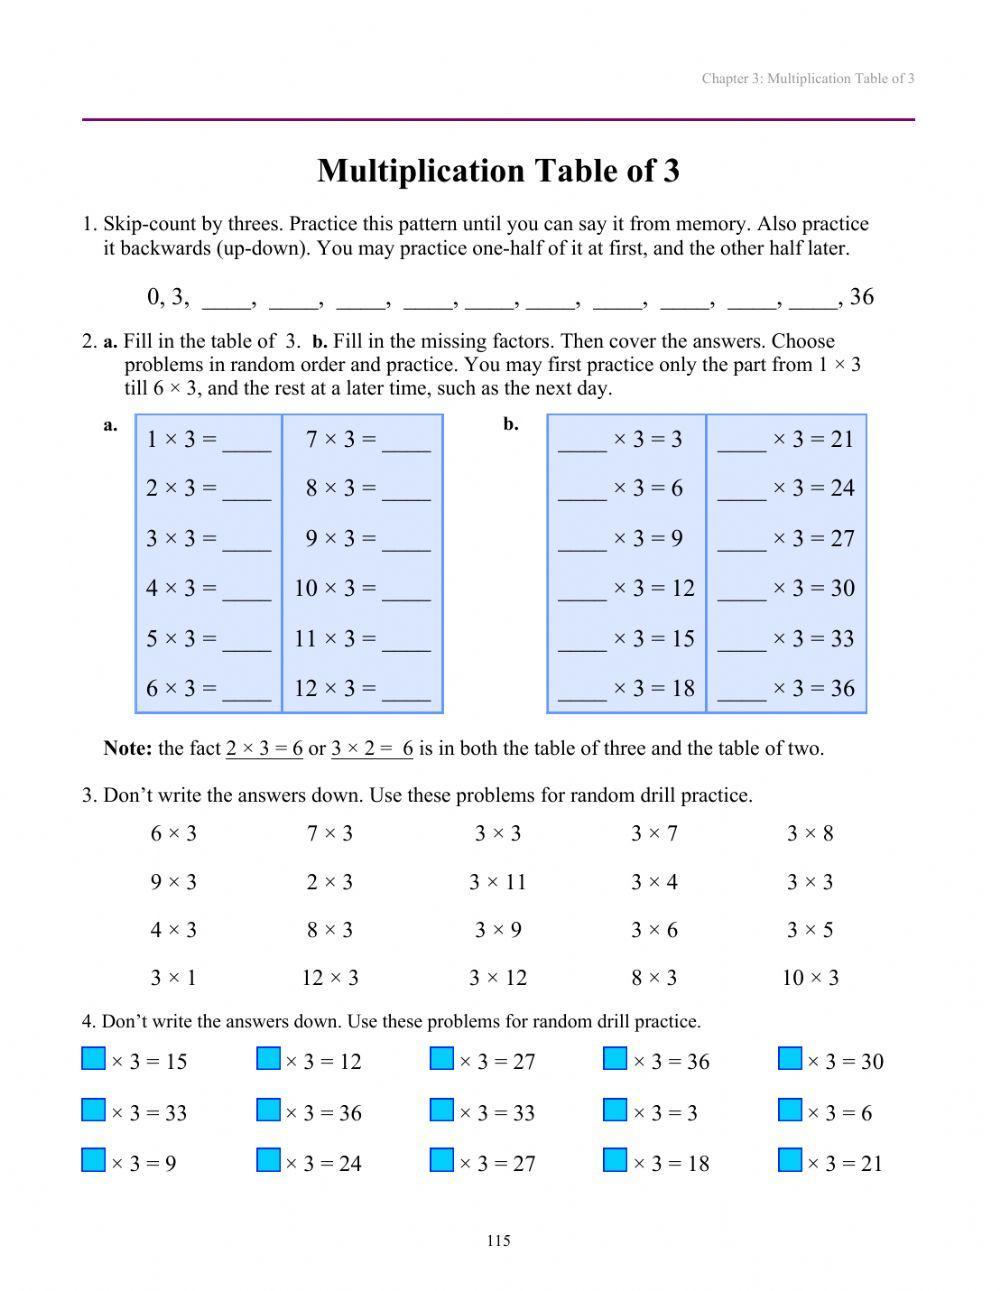 Multiplication table of 3